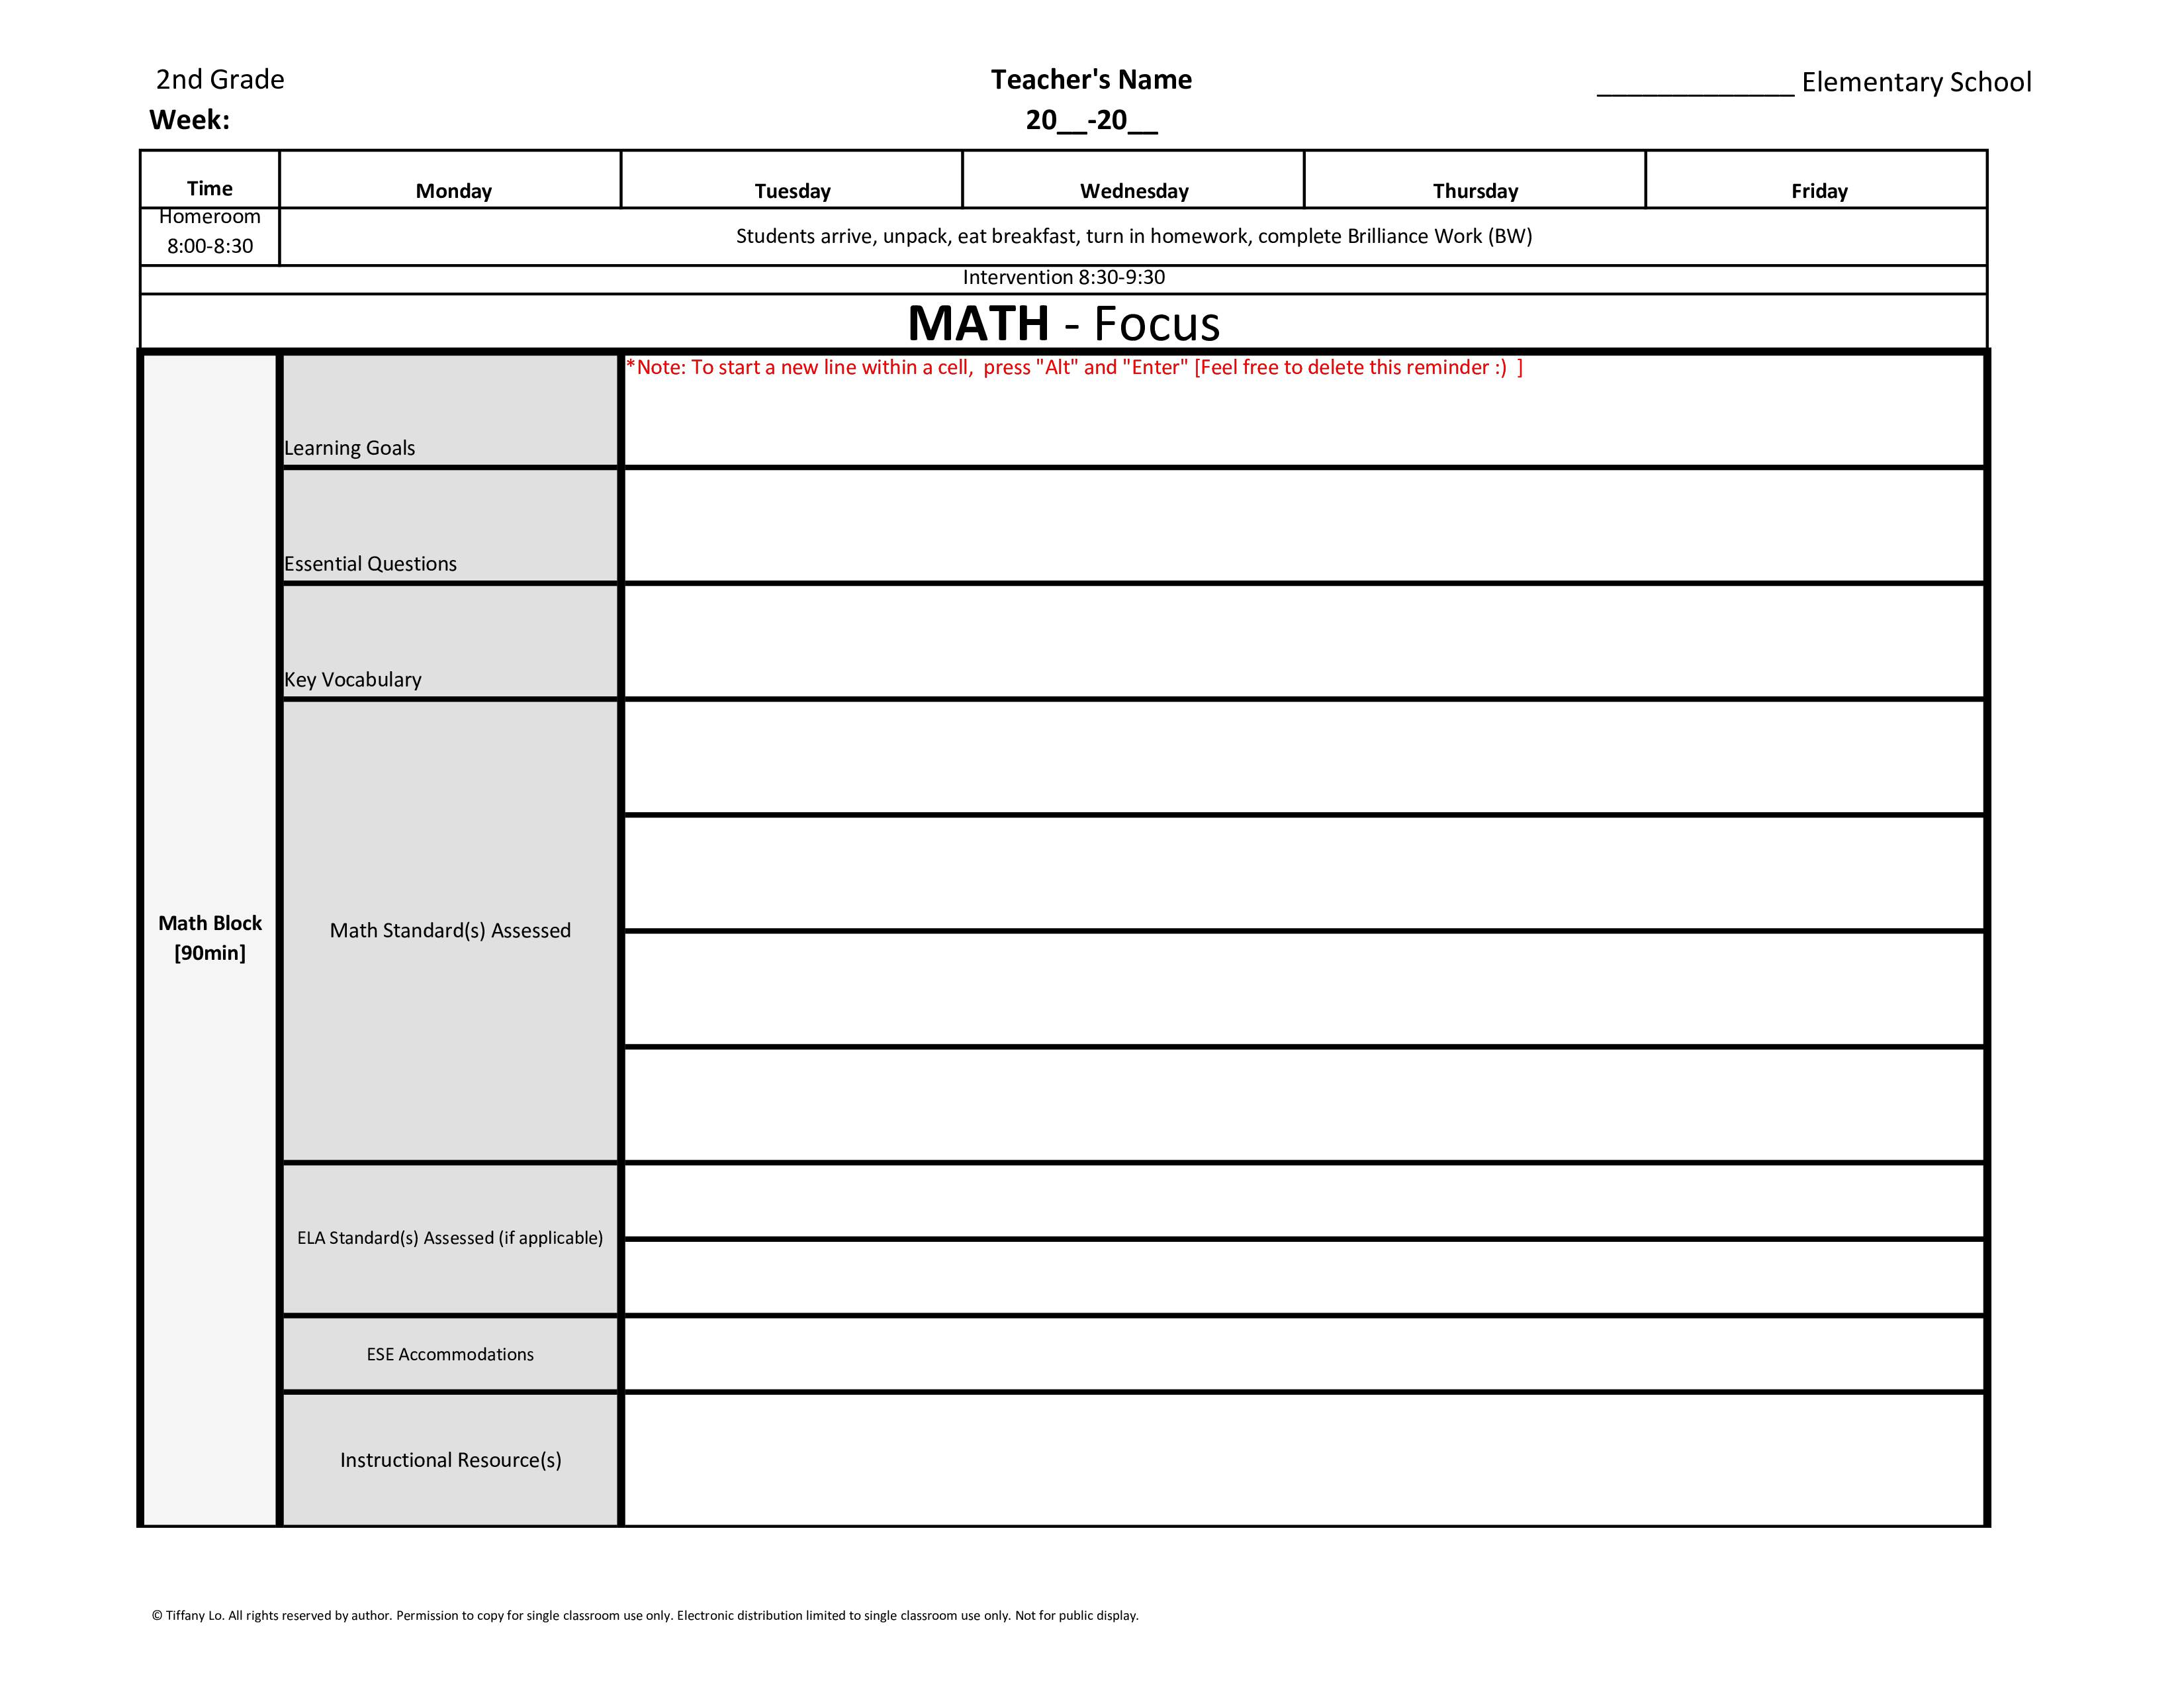 2nd Second Grade Common Core Weekly Lesson Plan Template W Drop Down Lists Tutor And Teacher Templates